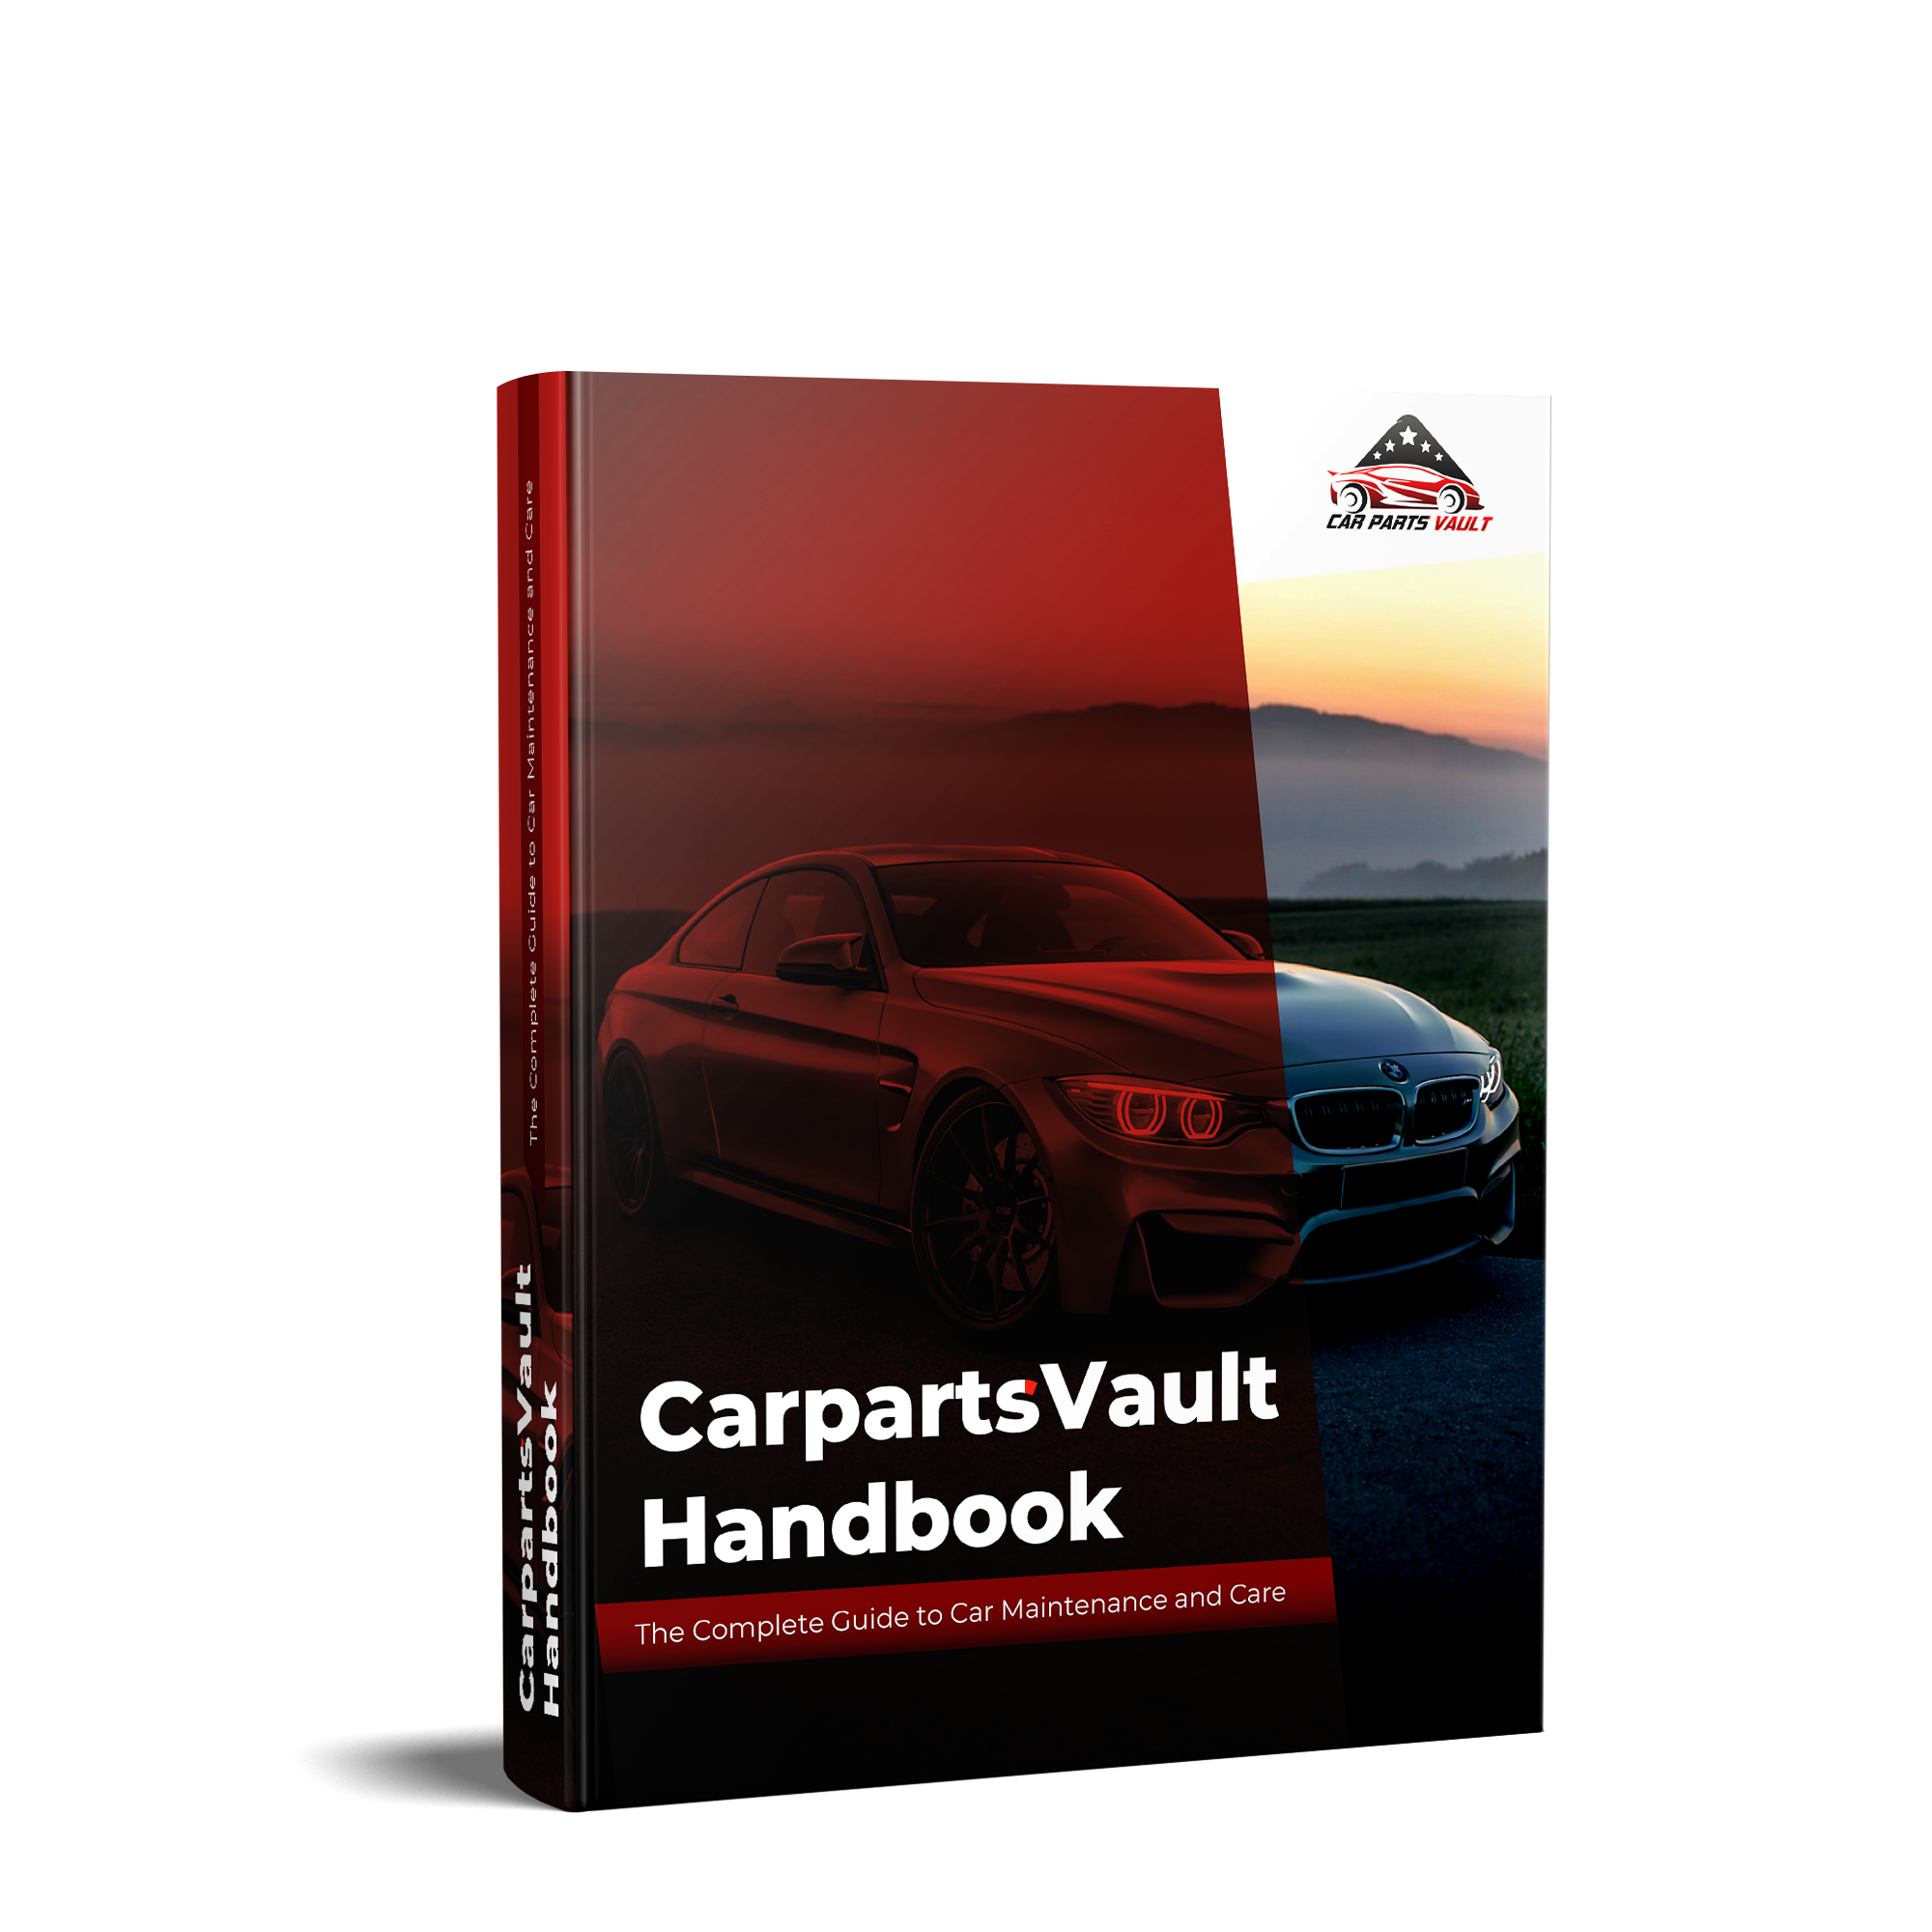 CarpartsVault Handbook: The Complete Guide to Car Maintenance and Care - 0